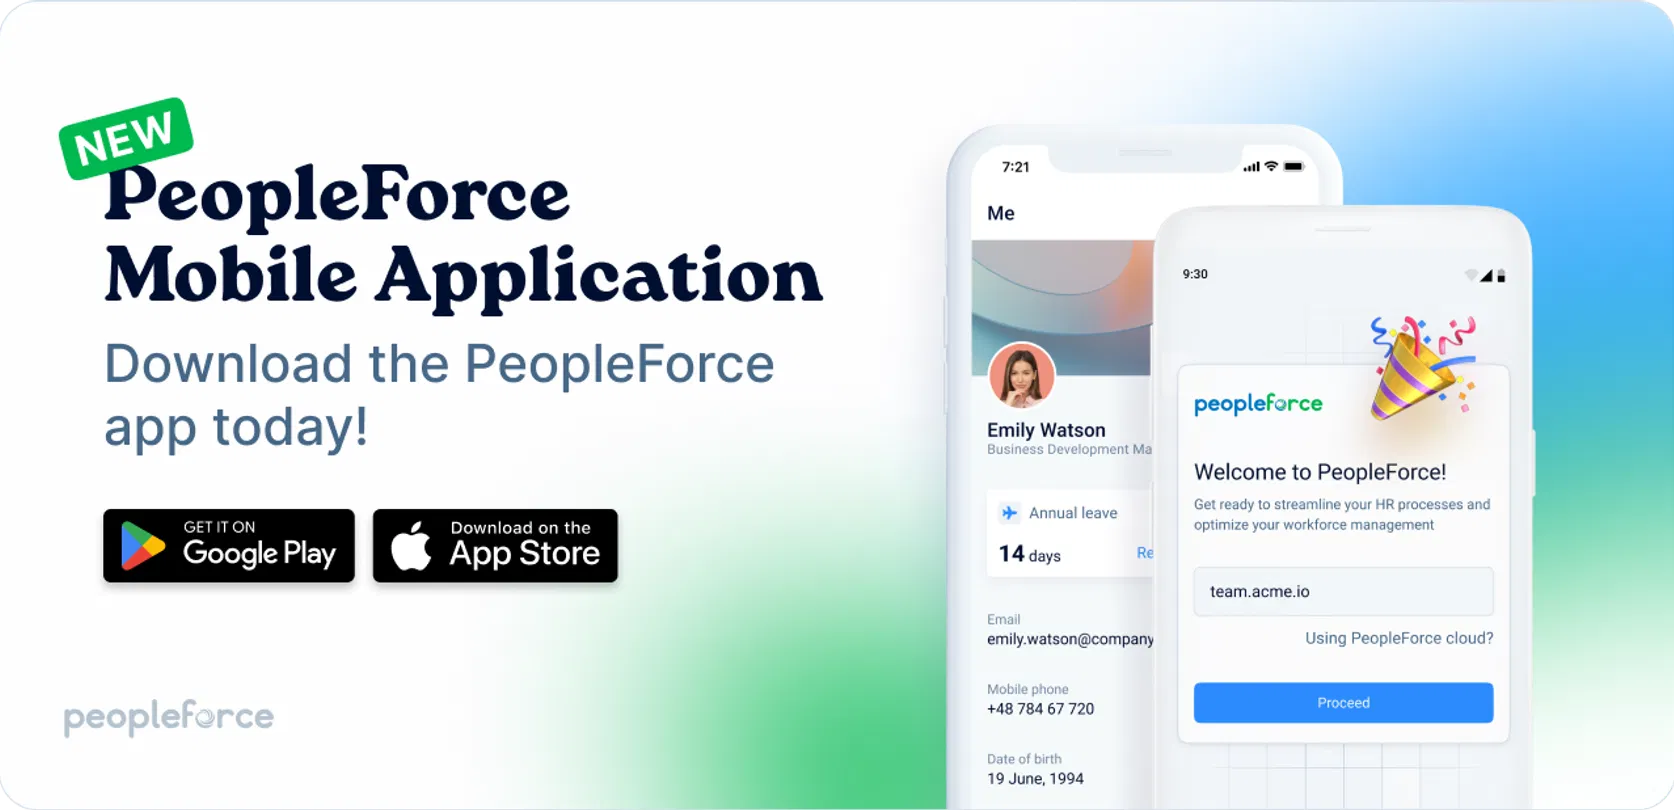 PeopleForce is launching a mobile app for iOS and Android platforms